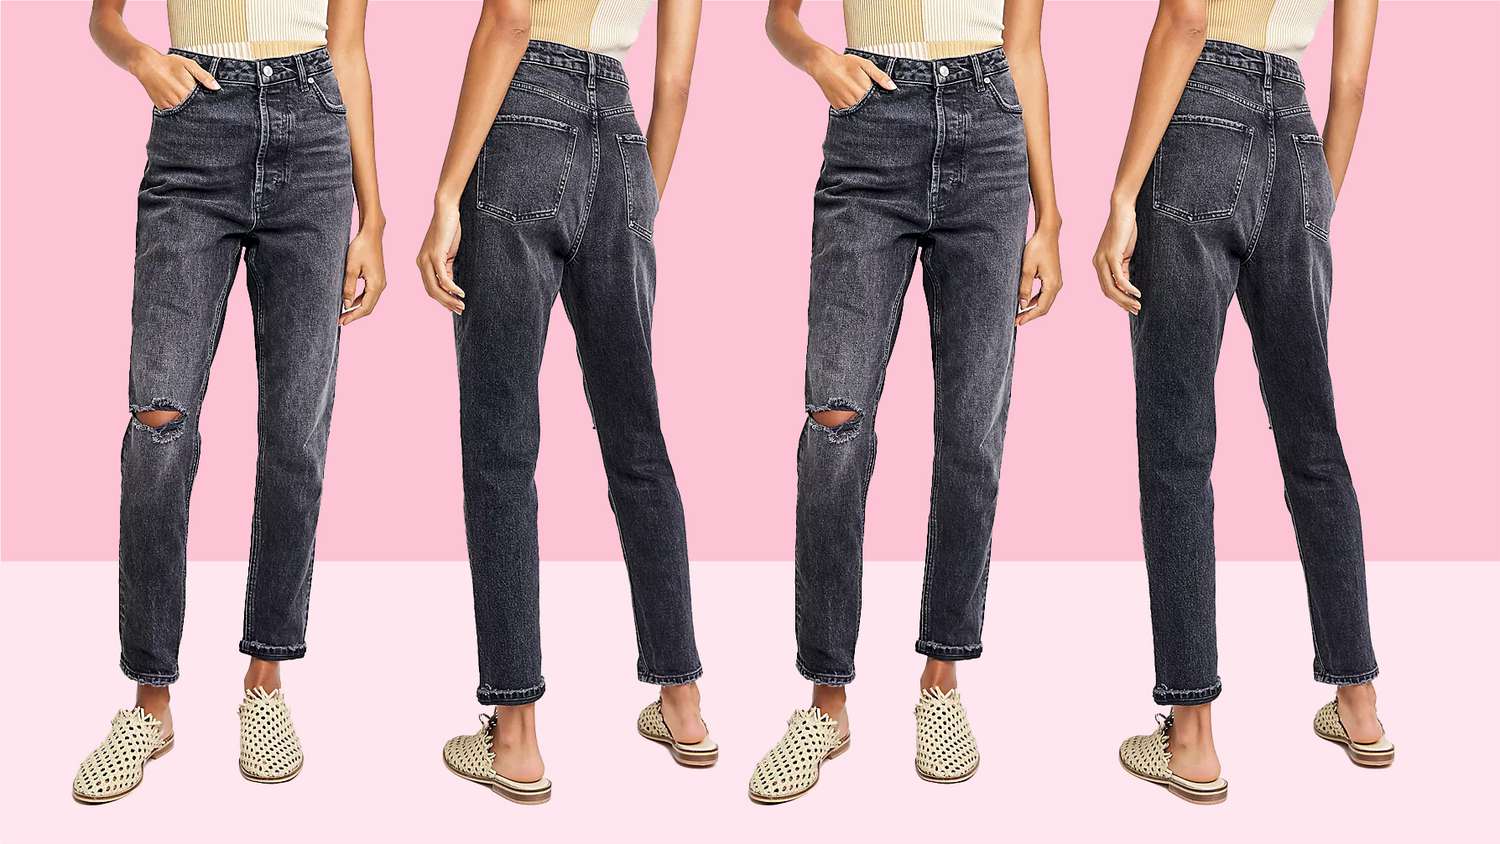 Gen Z Fashion Trends To Try That Aren’t Mom Jeans